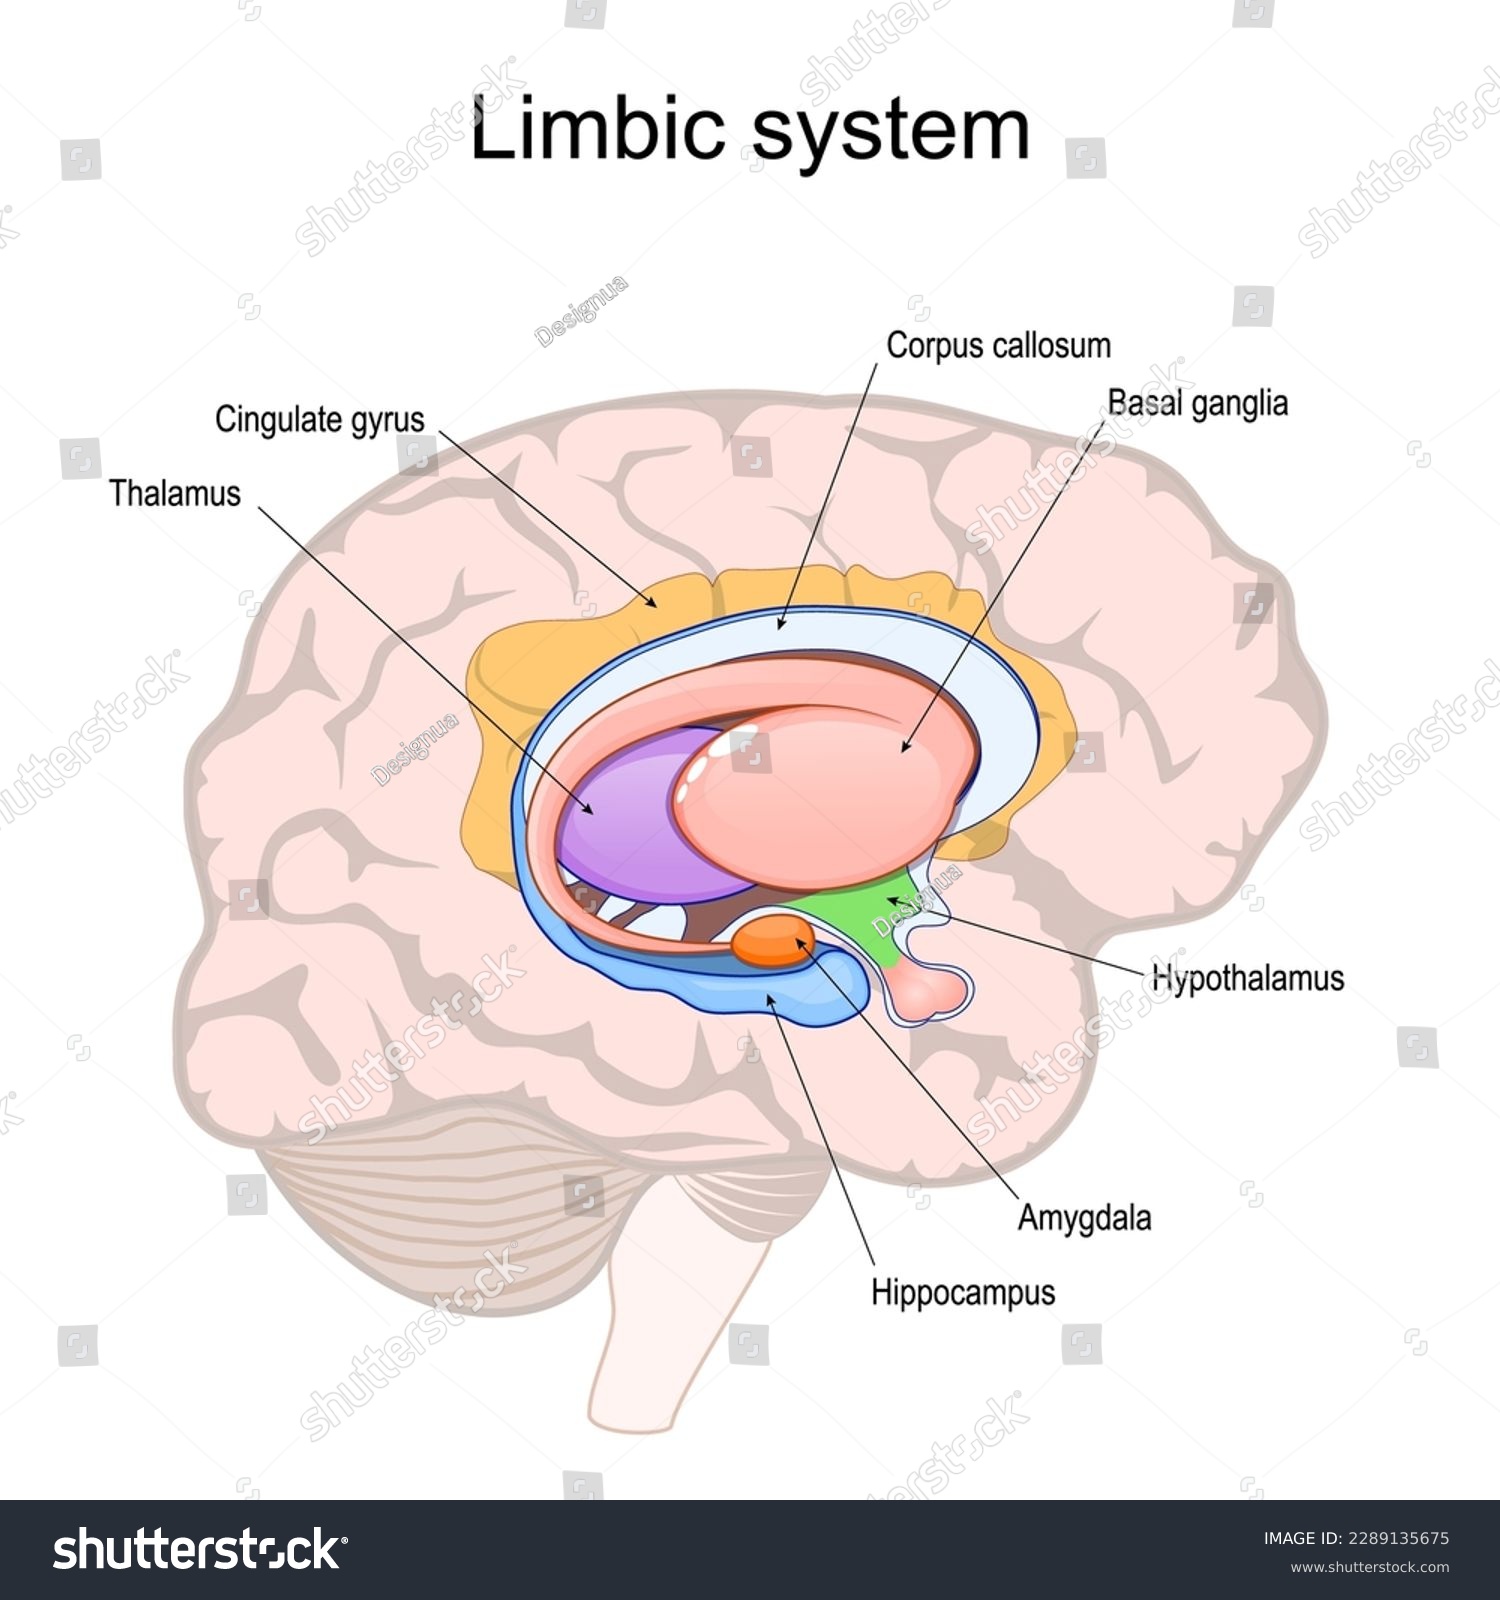 SVG of limbic system. Cross section of the human brain. Structure and Anatomical components of limbic system: Hypothalamus, Corpus callosum, Cingulate gyrus, Amygdala, Thalamus, Basal ganglia, Hippocampus svg